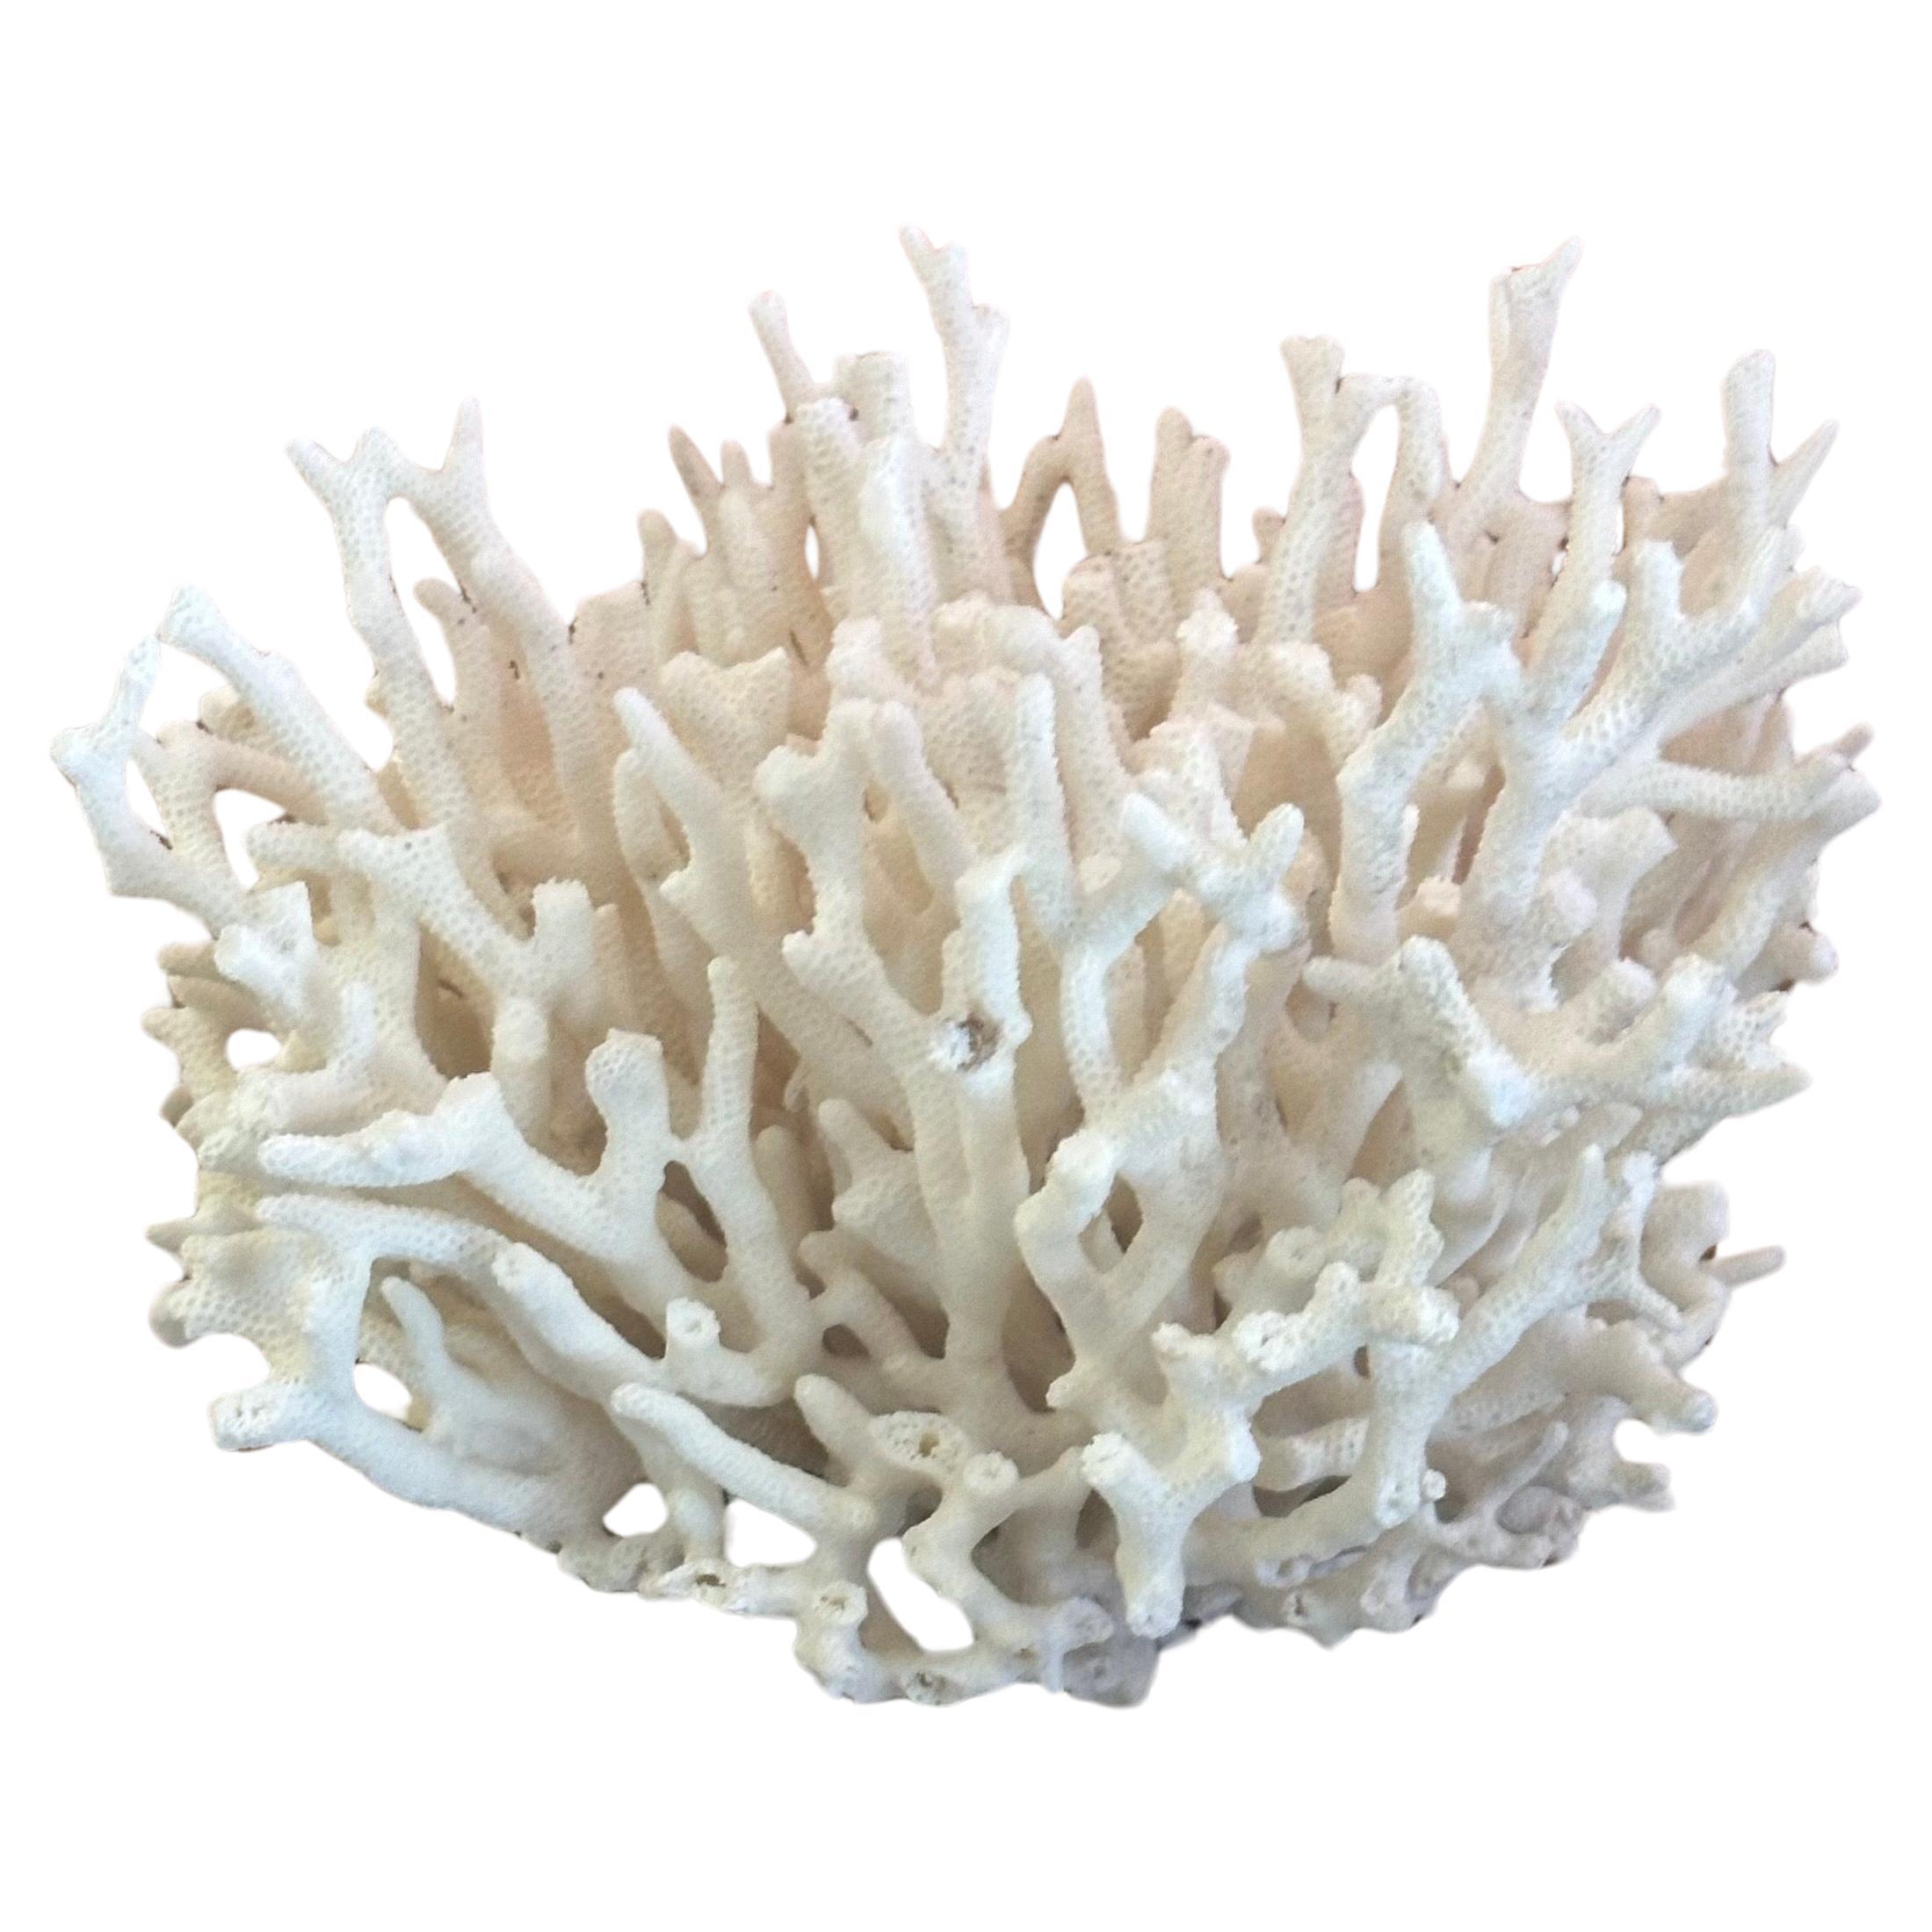 A large natural white sea coral specimen, circa 1970s. The piece is in great condition and measures 7